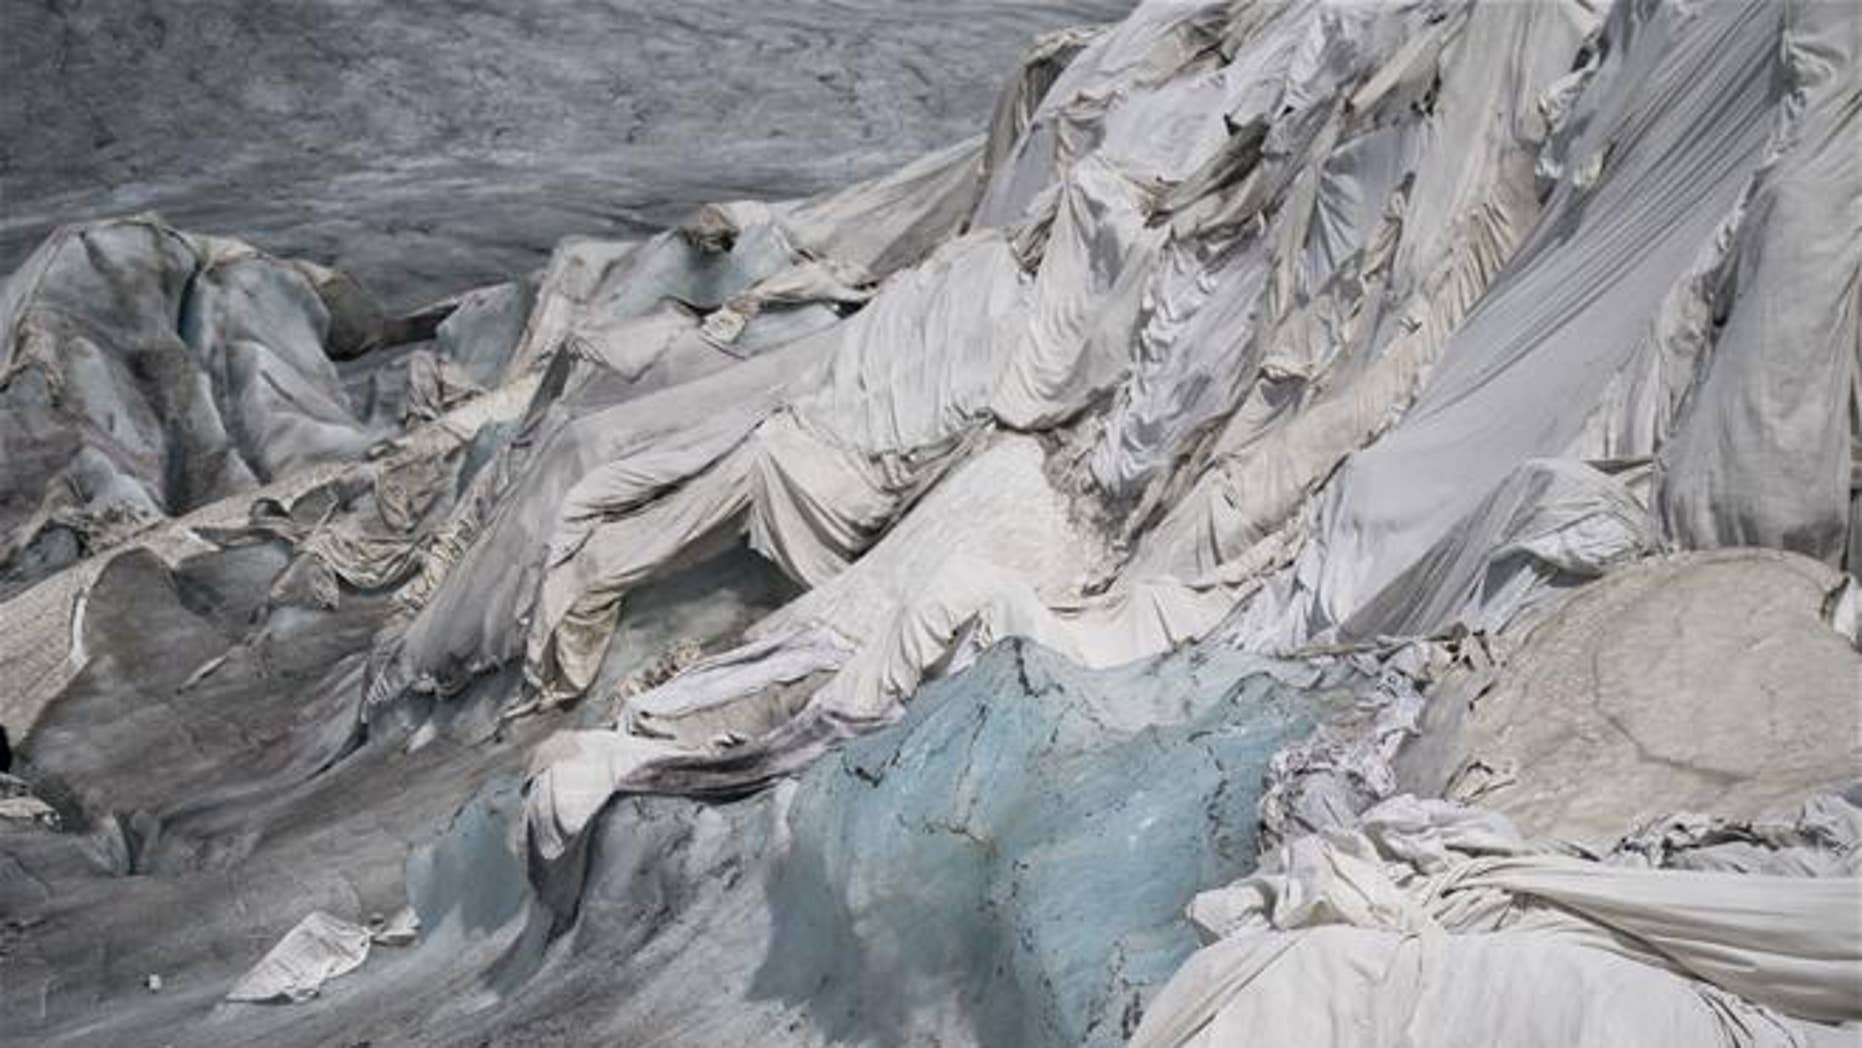 To Slow Melting, Residents Resort to Wrapping a Glacier in 